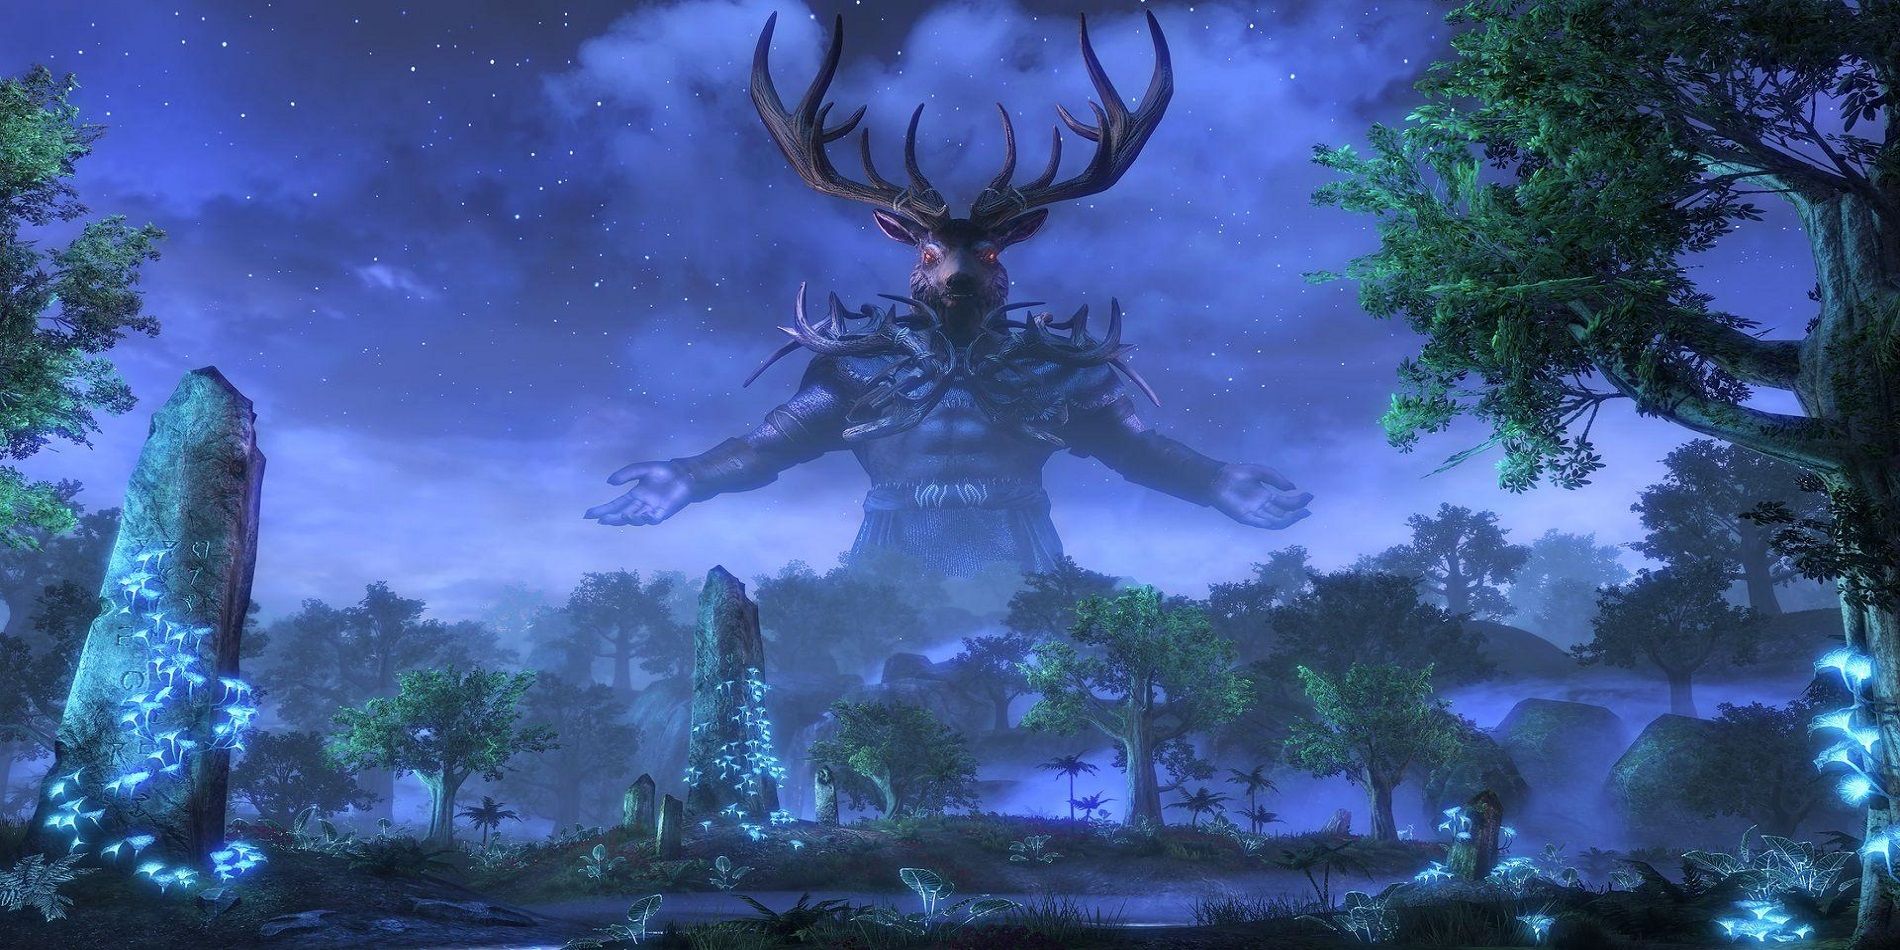 Elder Scrolls Daedric Prince Hircine with Stag Head Standing in Twilight Sky over Mountains and Forests Hands Outstretched